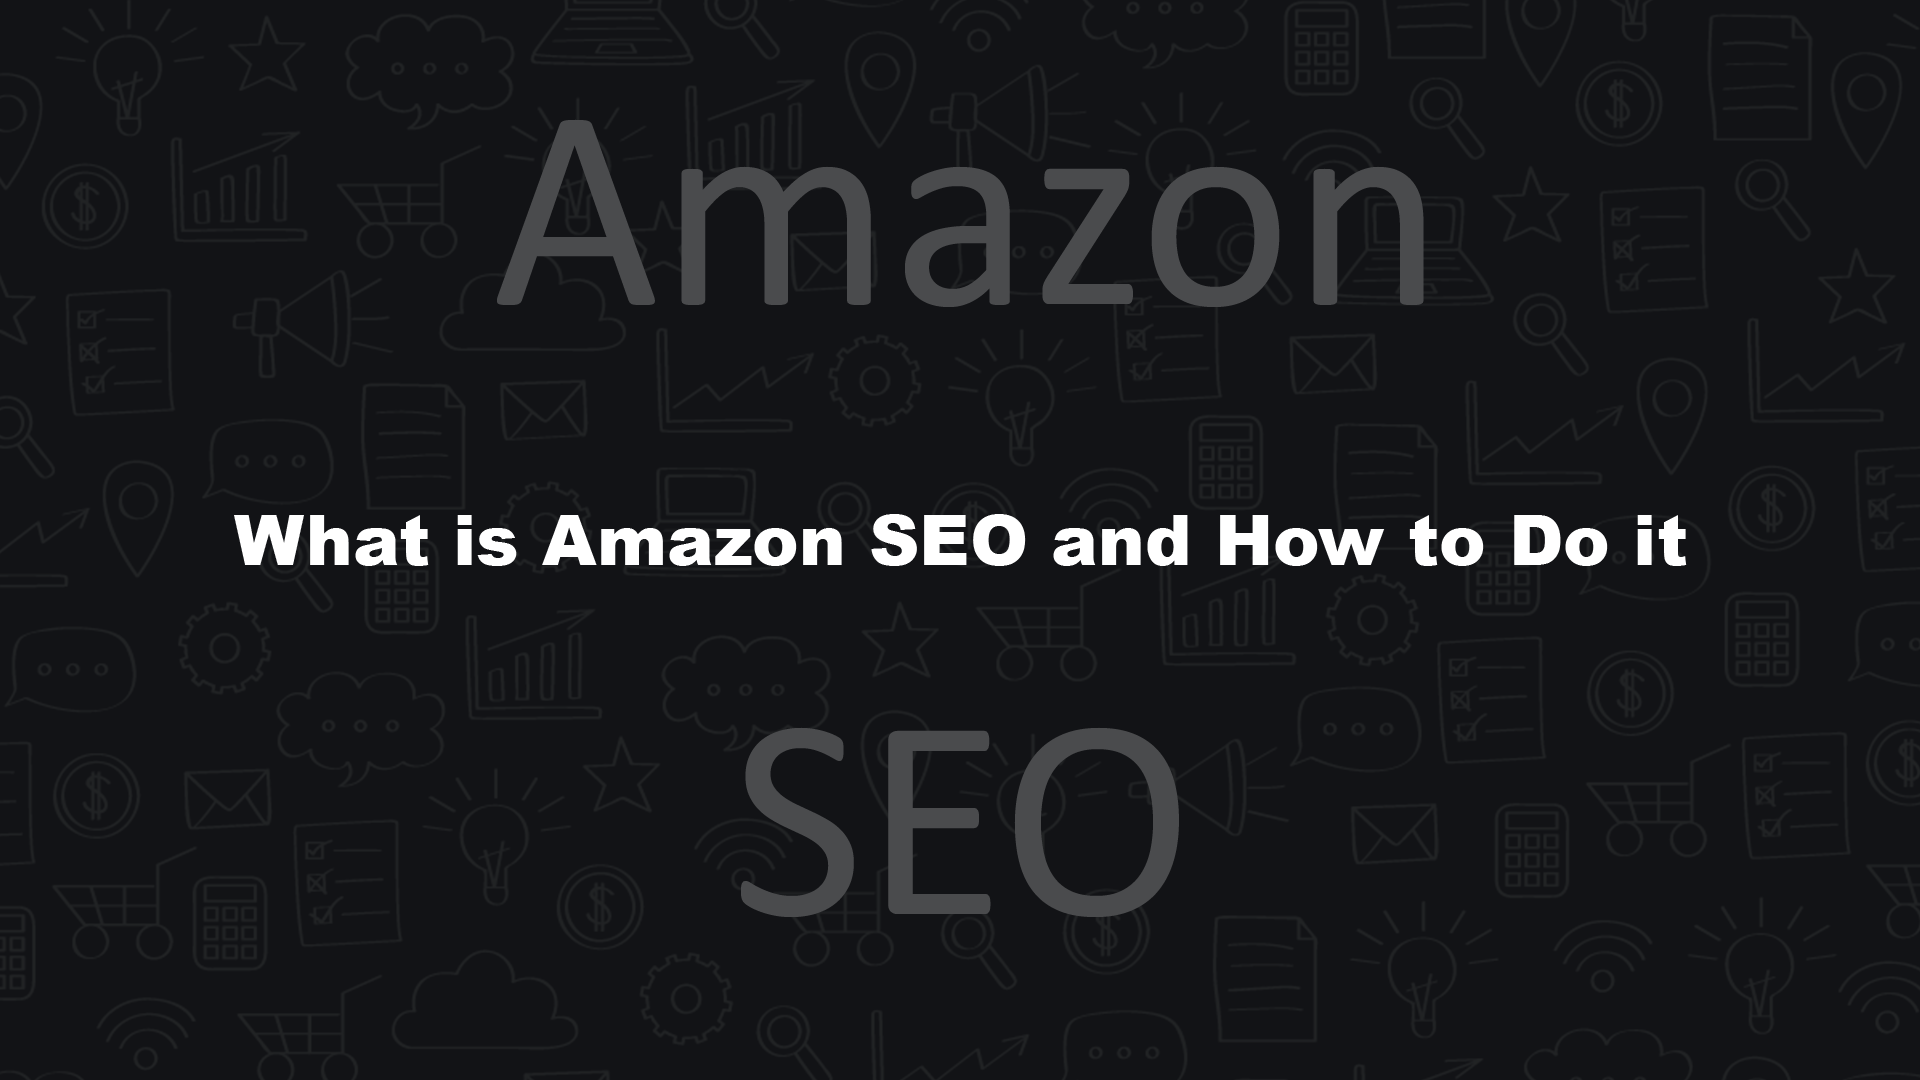 What is Amazon SEO and How to Do it